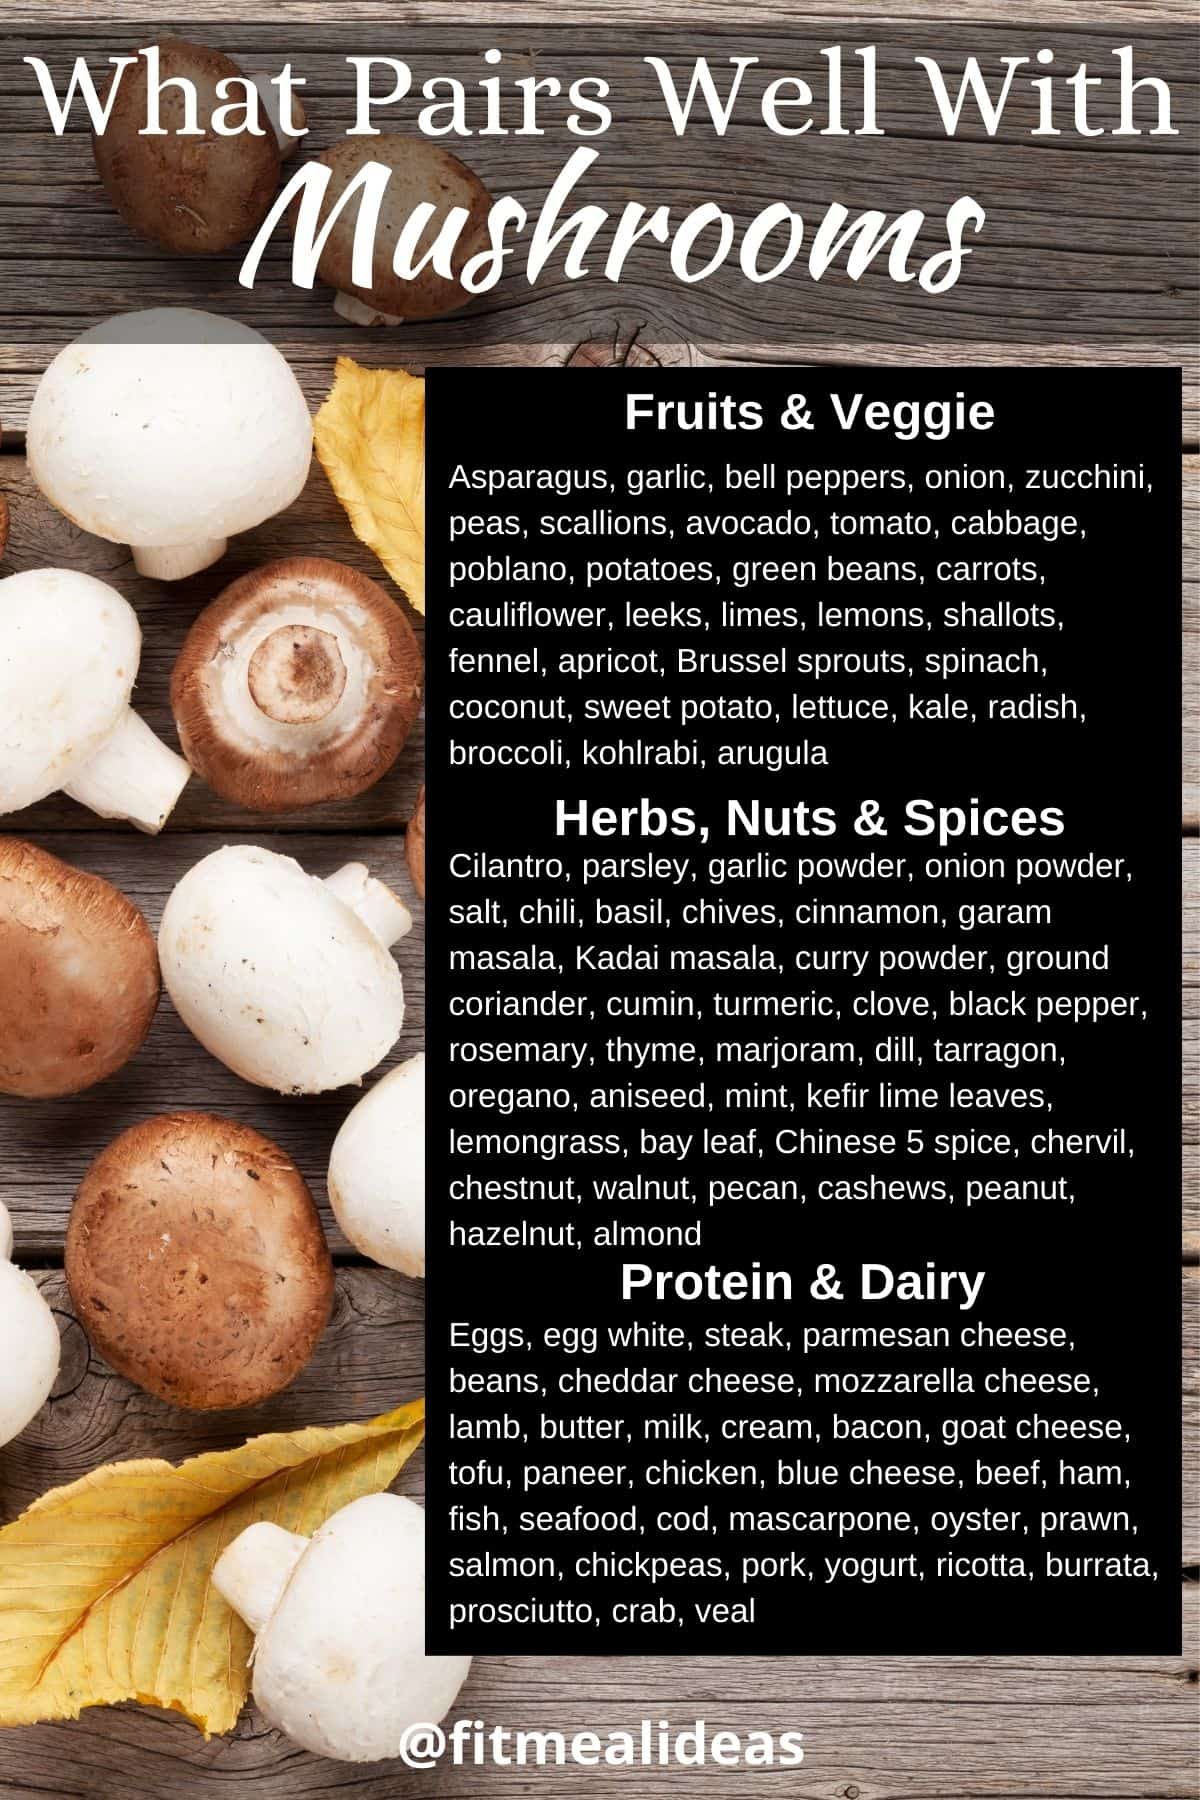 infographic depicting what are the food groups that pair well with mushrooms.